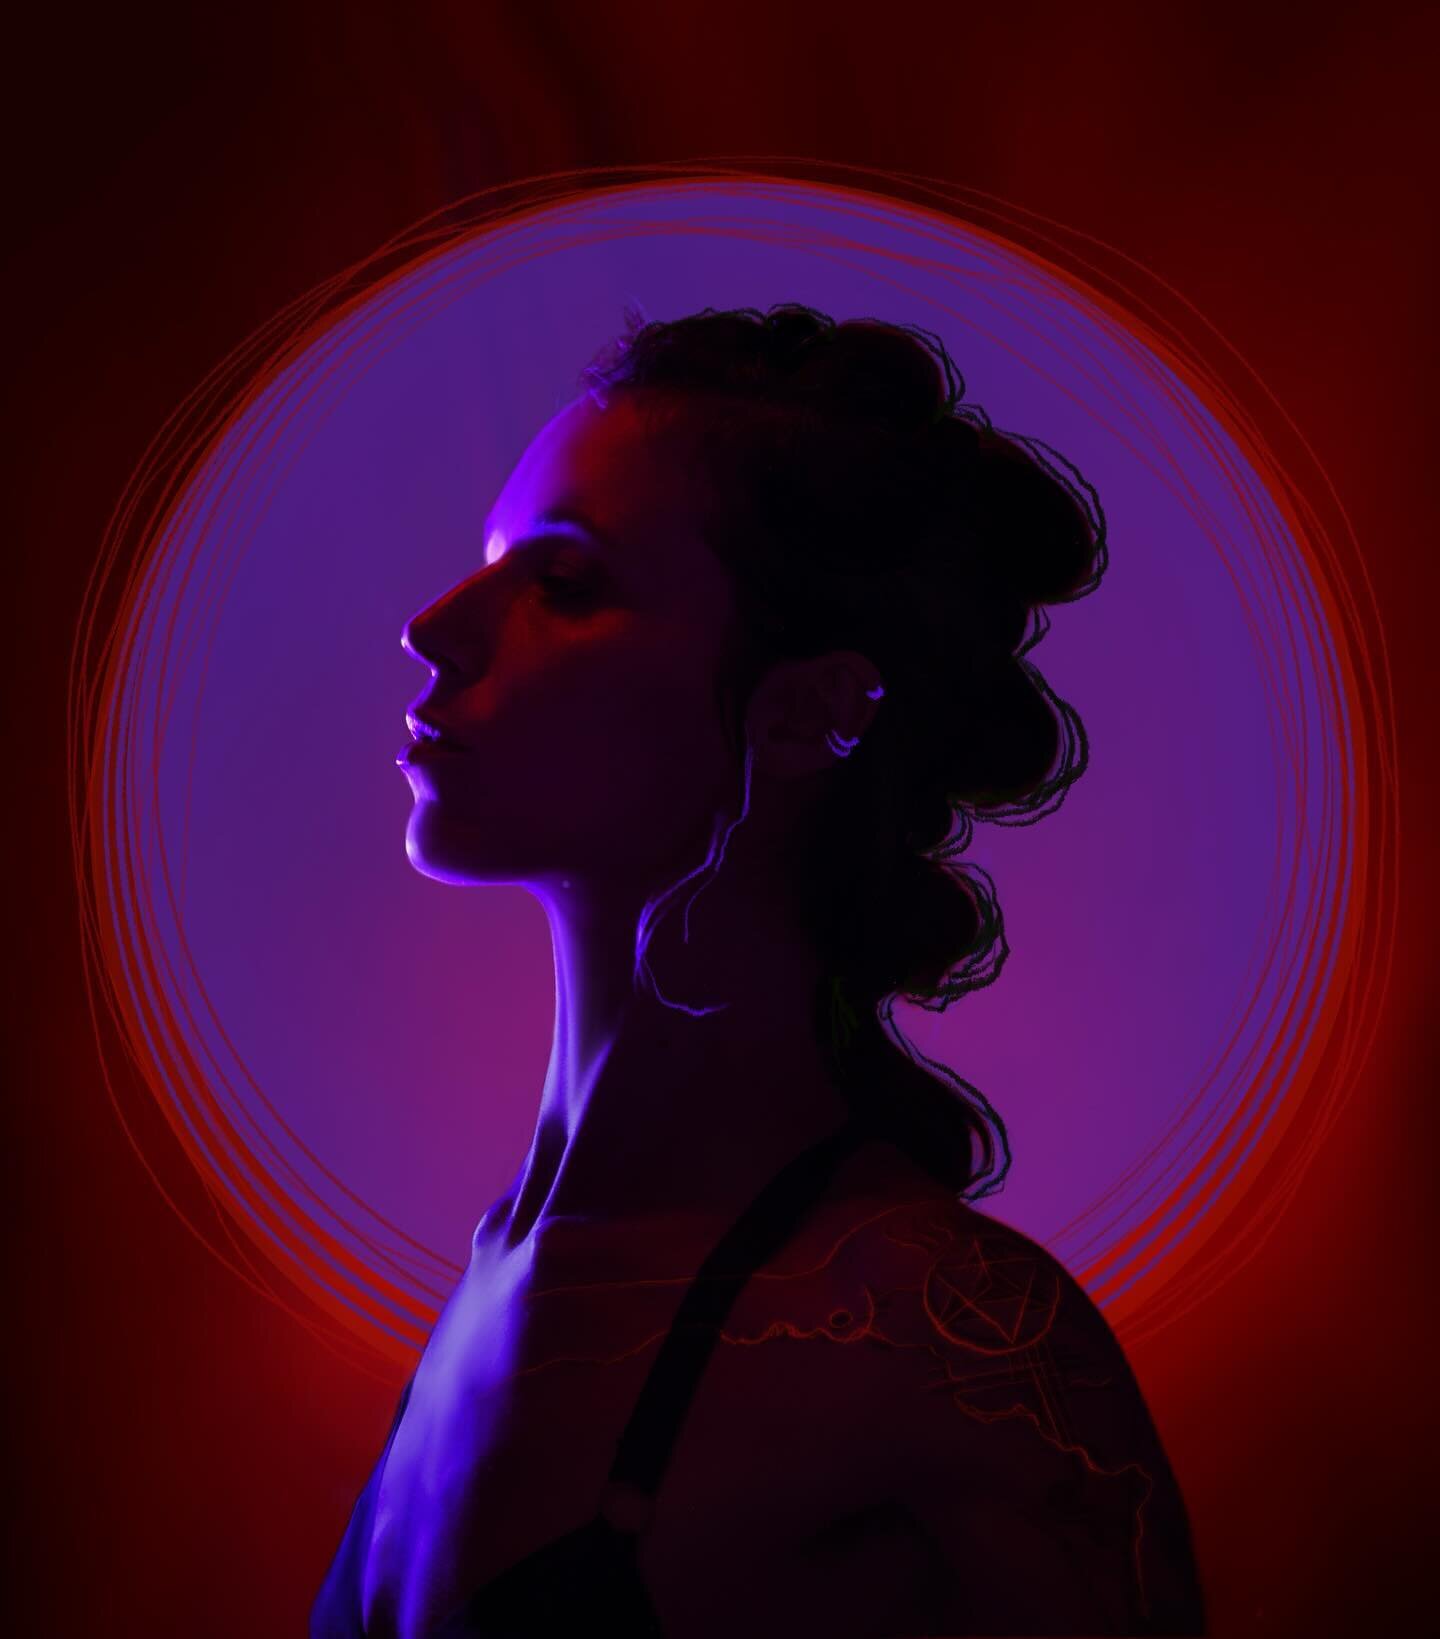 My mantras for this new moon in Sagittarius 🔴🌑♐️🟣

☽ I take up the space meant for me.
☽ I protect and nourish my space.
☽ I stand up for myself and my well-being. 

🔴👤🟣

#selfportrait #digitalart